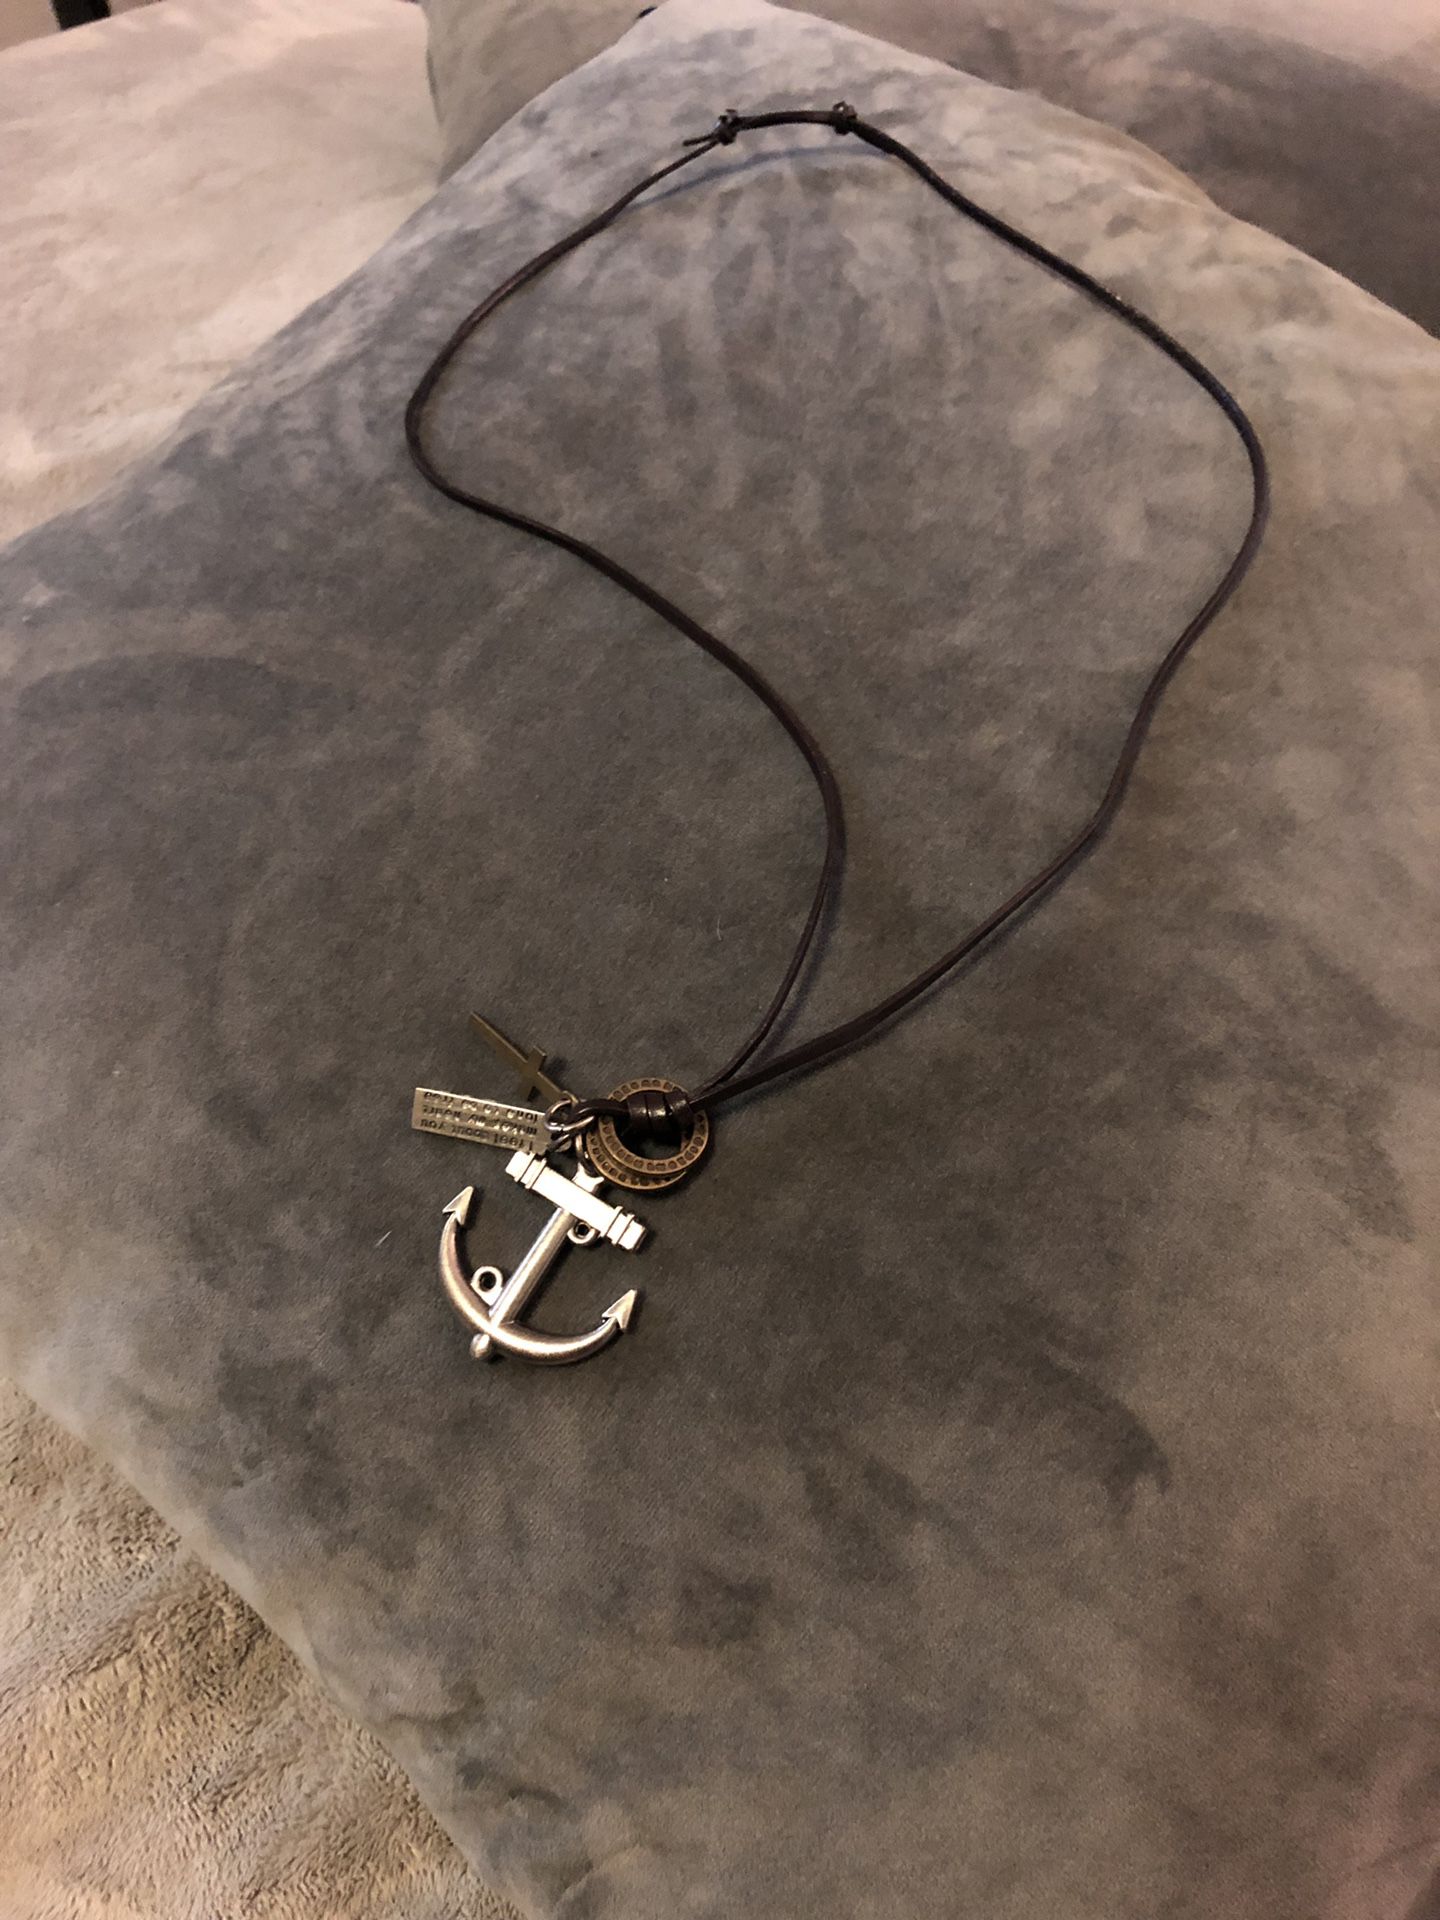 Mens leather anchor necklace paid $15 (17in long) excellent condition!